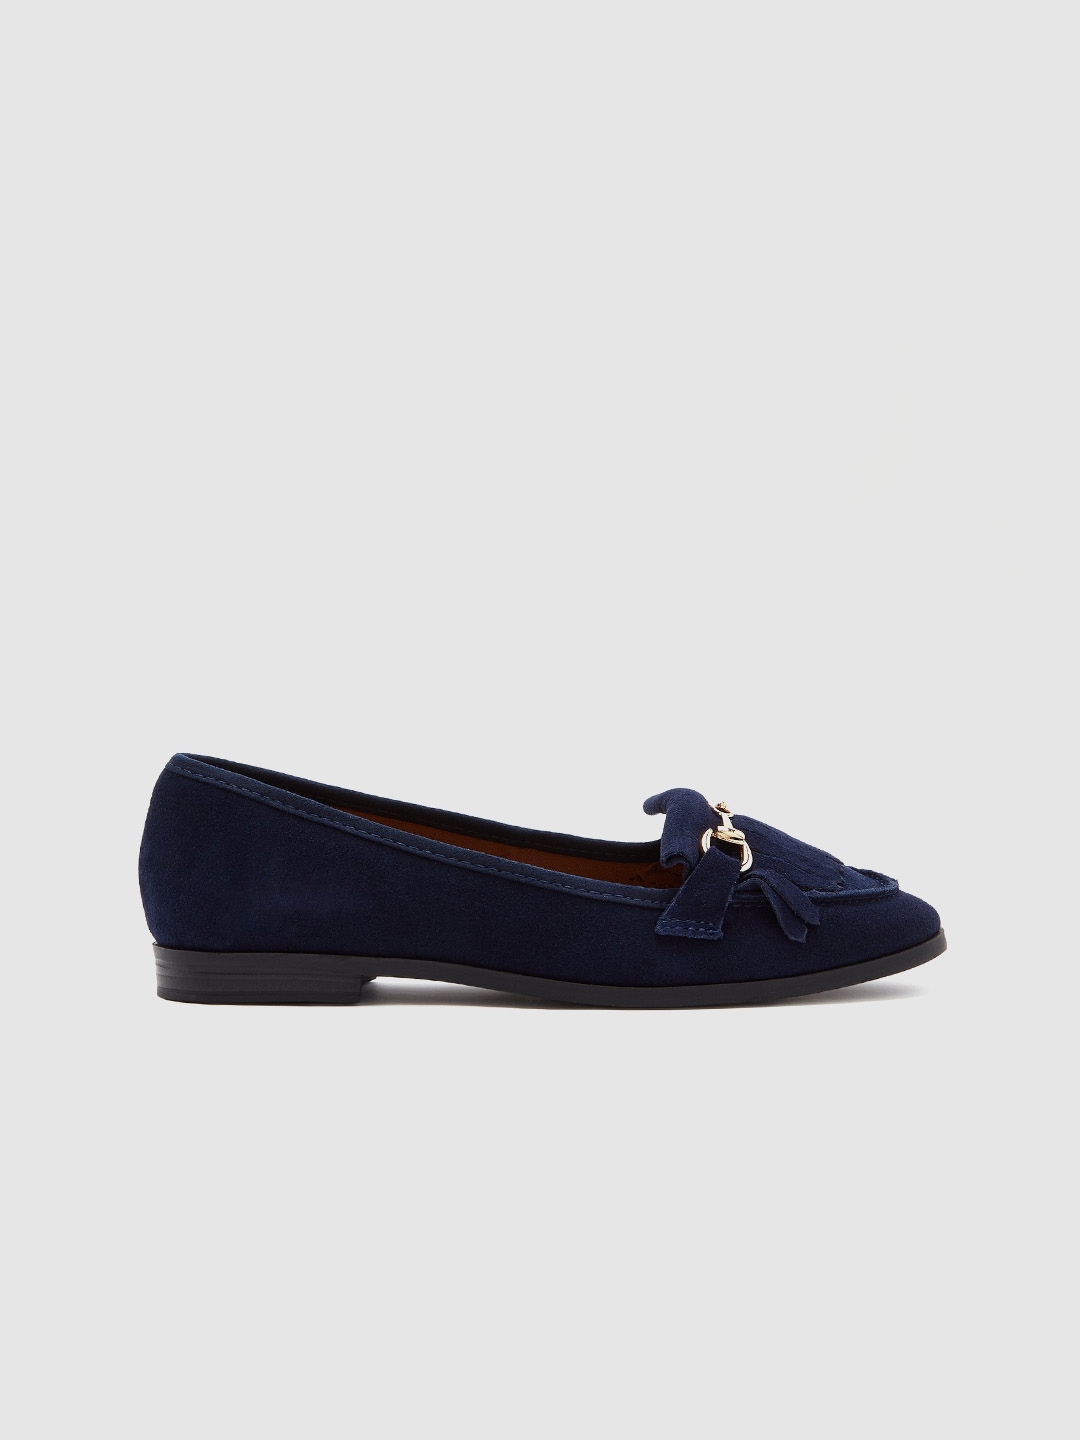 Buy DOROTHY PERKINS Women Navy Blue Leather Solid Horsebit Loafers - Casual Shoes for Women 